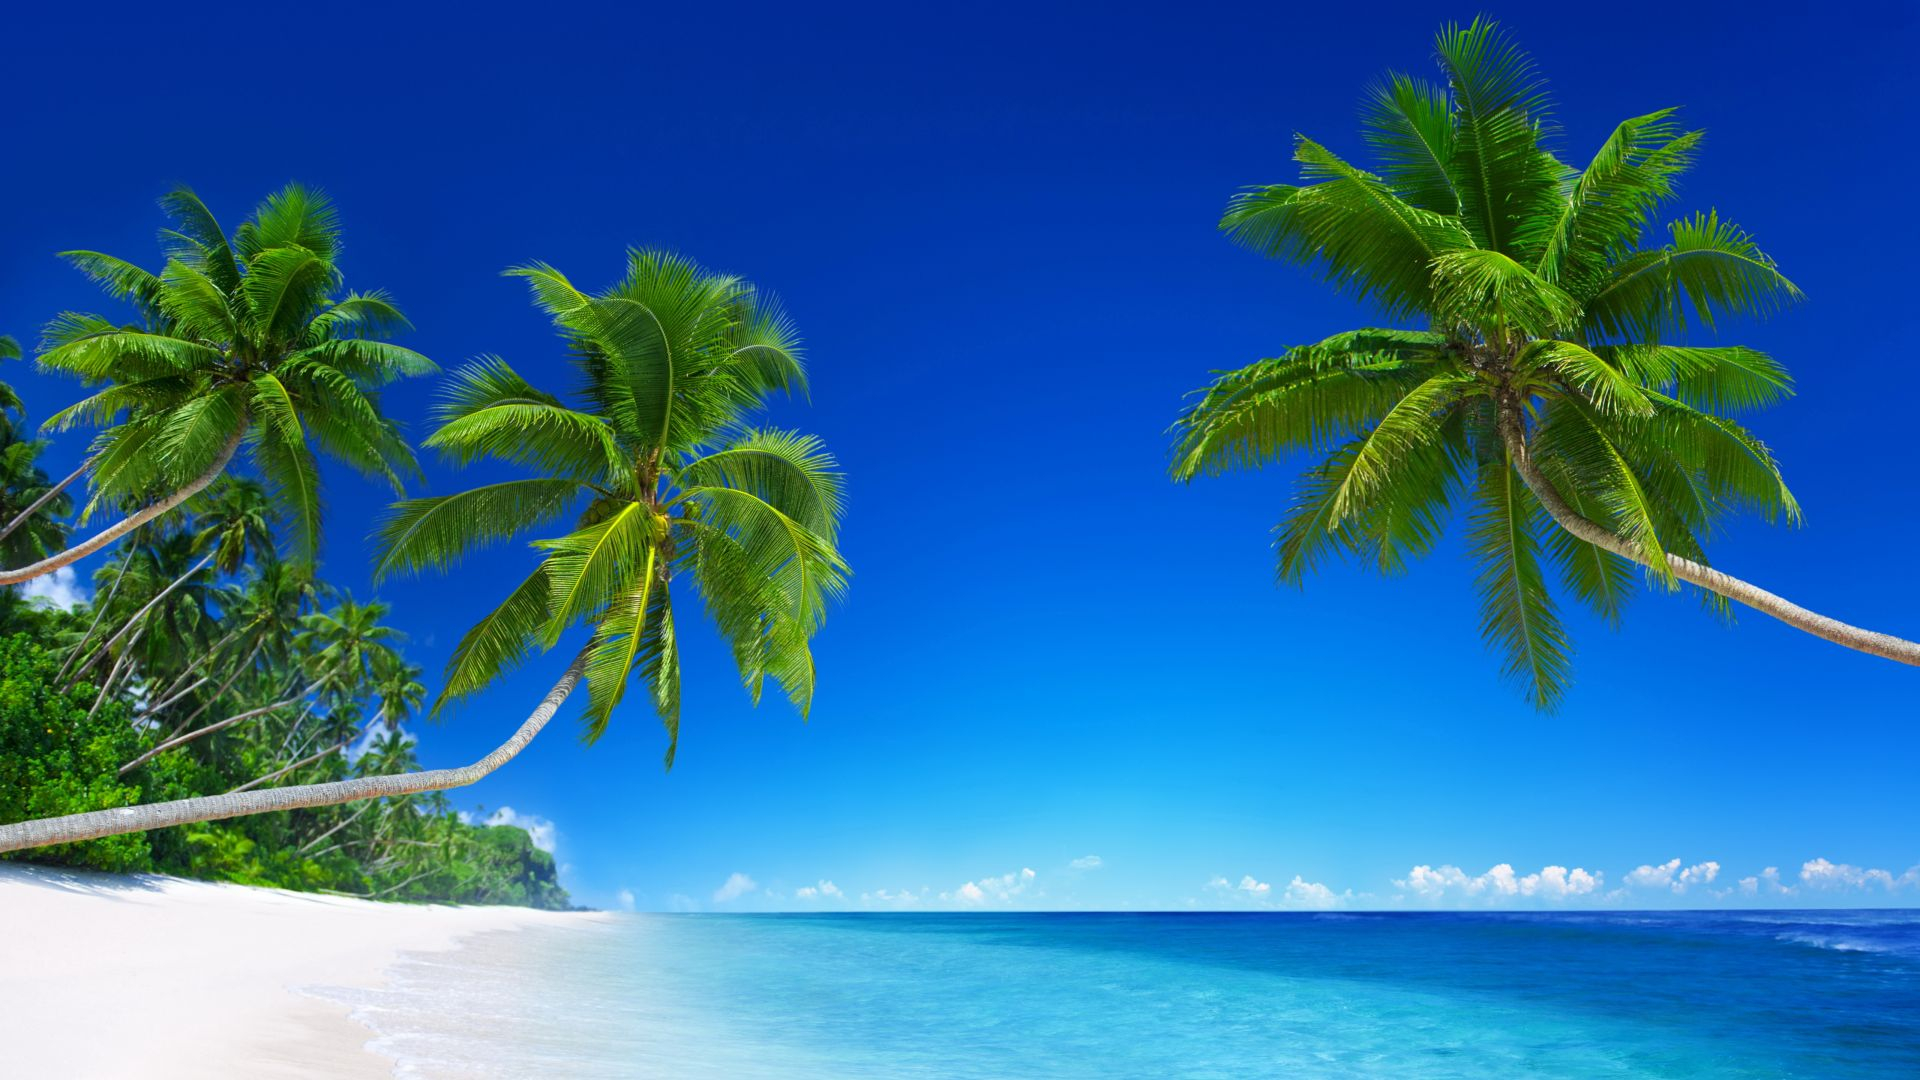 1920x1080 Green Palm Tree on White Sand Beach During Daytime Wallpaper KDE Store